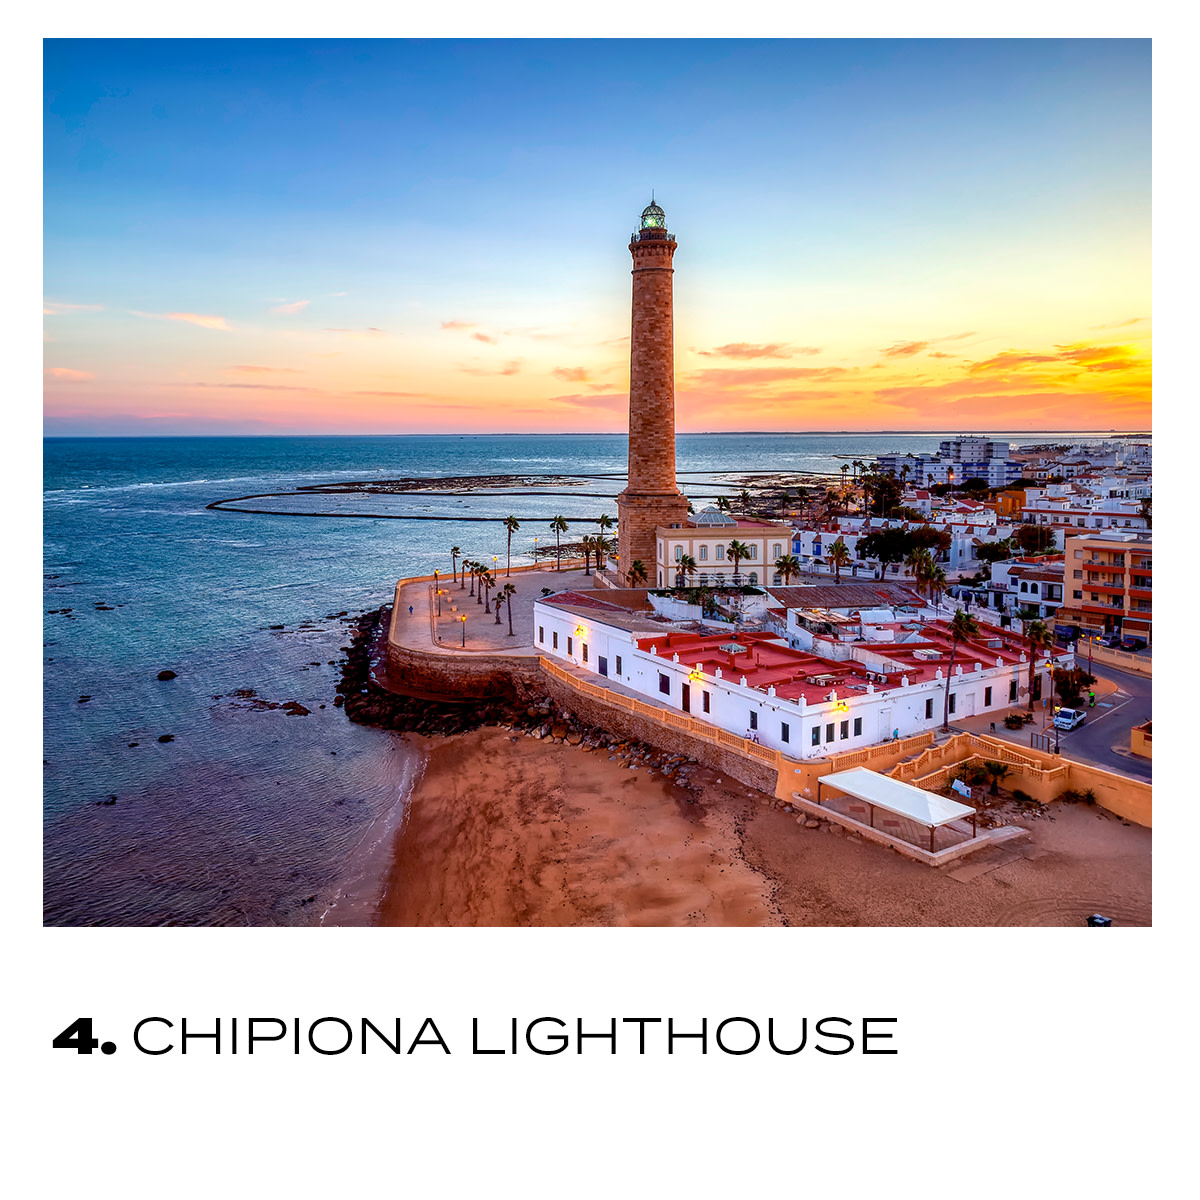 Here is our itinerary! ⬇️ You will love the views of the sea... ❤️

▶️ The #CabodeGataLighthouse...

▶️ The #TorroxLighthouse...

▶️ The #TrafalgarLighthouse...

▶️ And the #ChipionaLighthouse! 🤗 

👉 bit.ly/3rzIrgP

#VisitSpain #SpainRoutes @viveandalucia